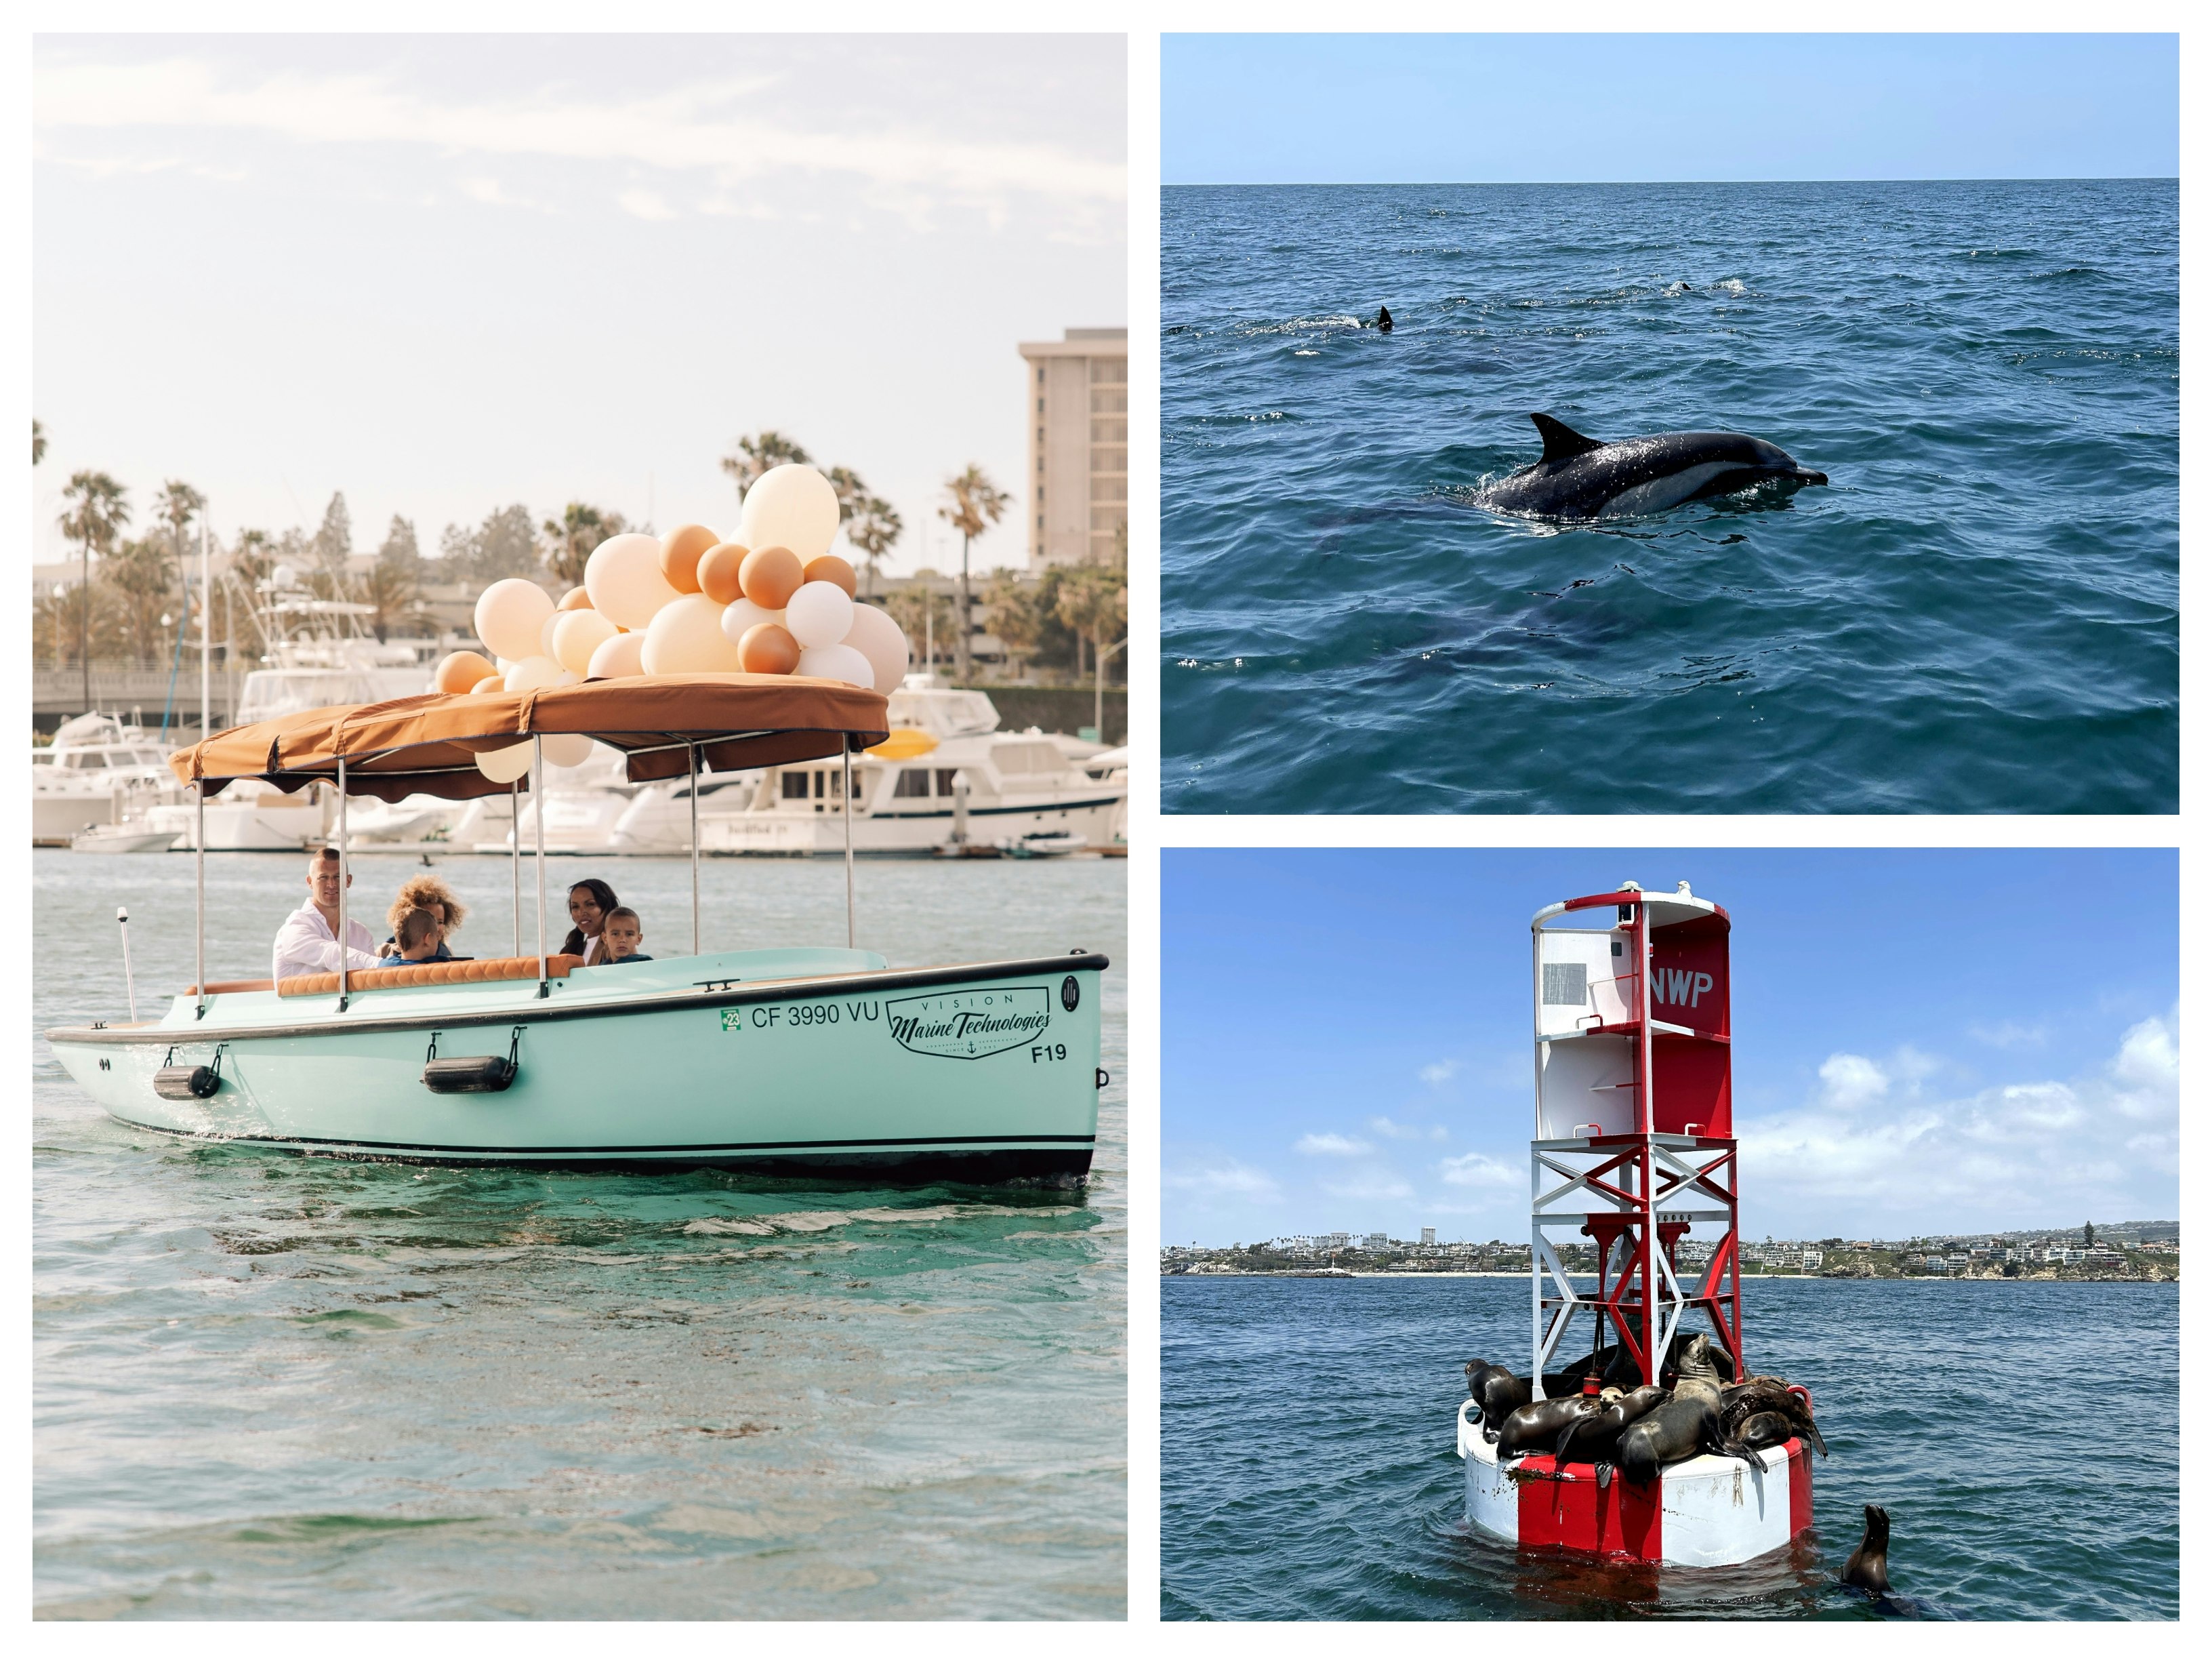 Collage Left: A boat with a roof covered in balloons; Top right: a dolphin's fin breaches the surface of the water; Bottom Right: Seals nap in the sun on a large buoy 